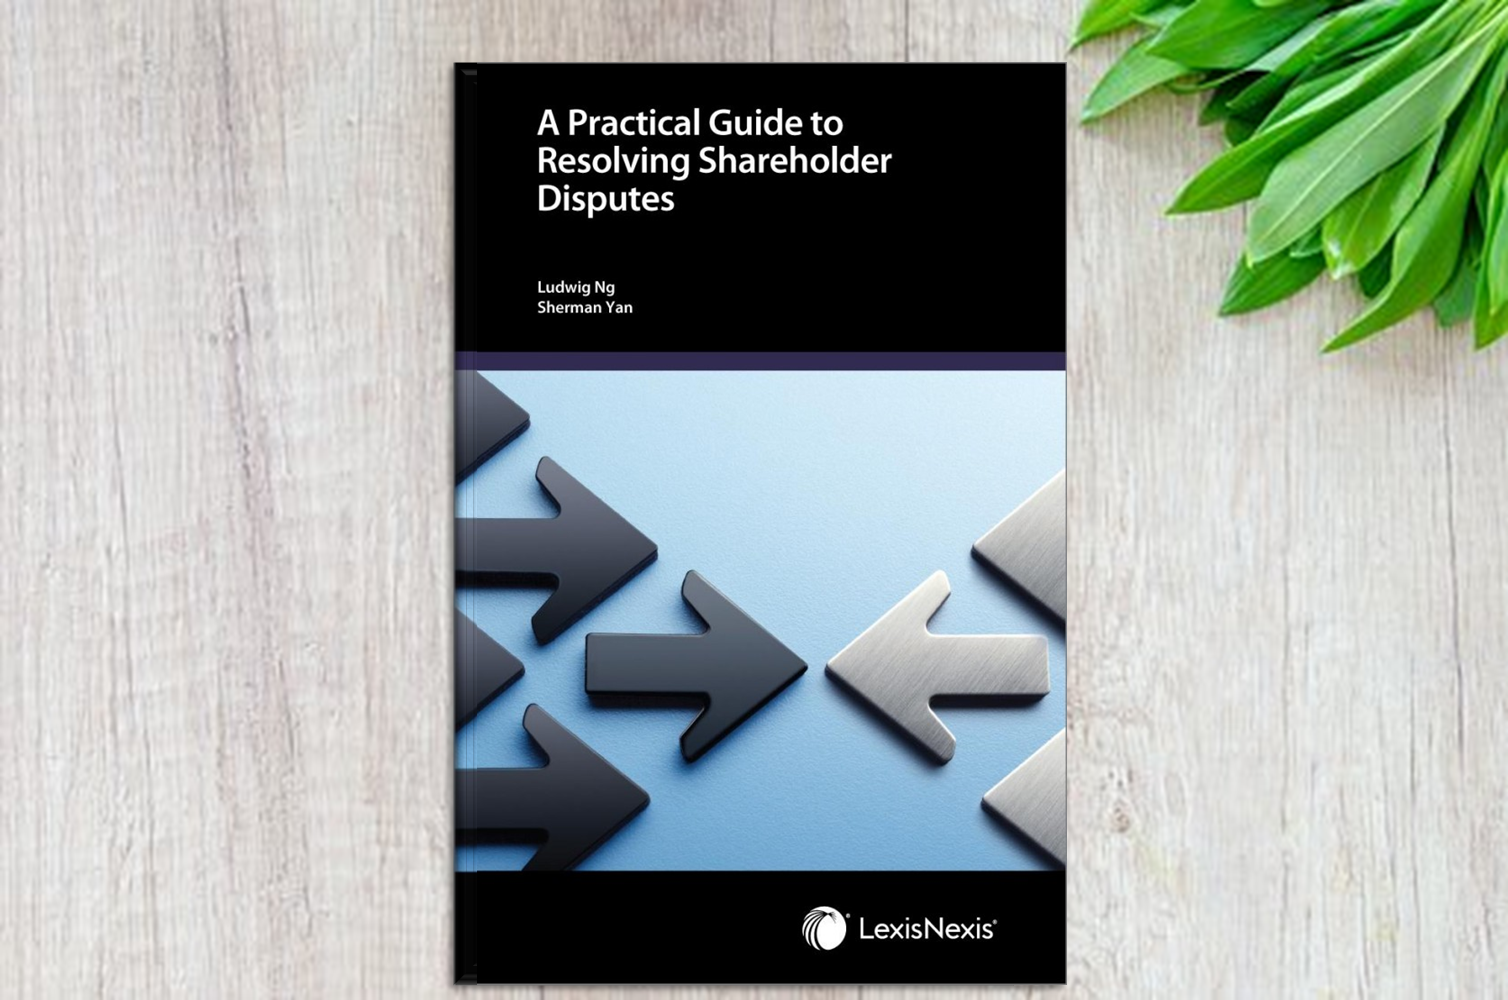 A Practical Guide to Resolving Shareholder Disputes